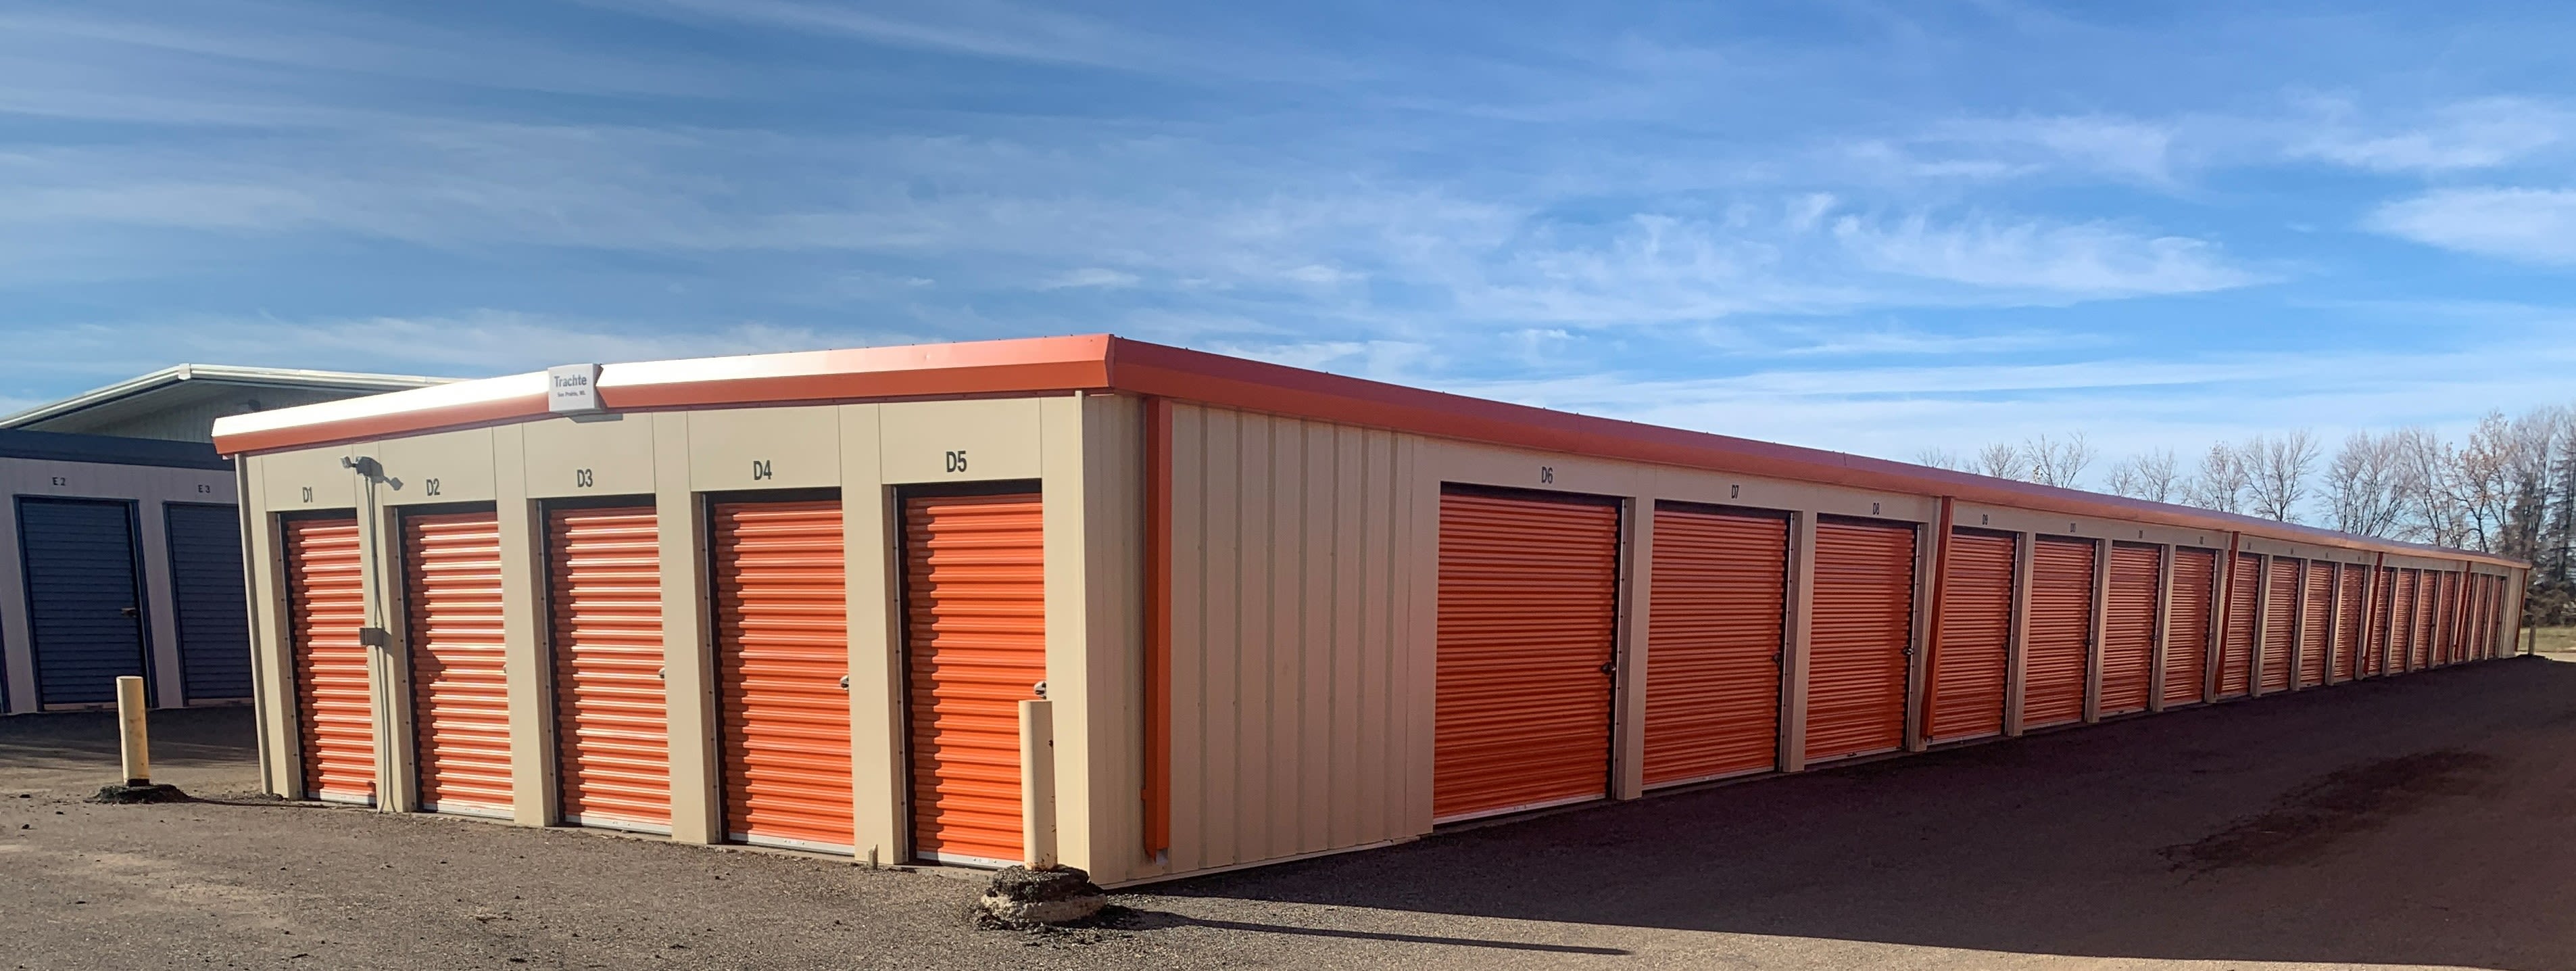 View our list of features at KO Storage in Minot, North Dakota